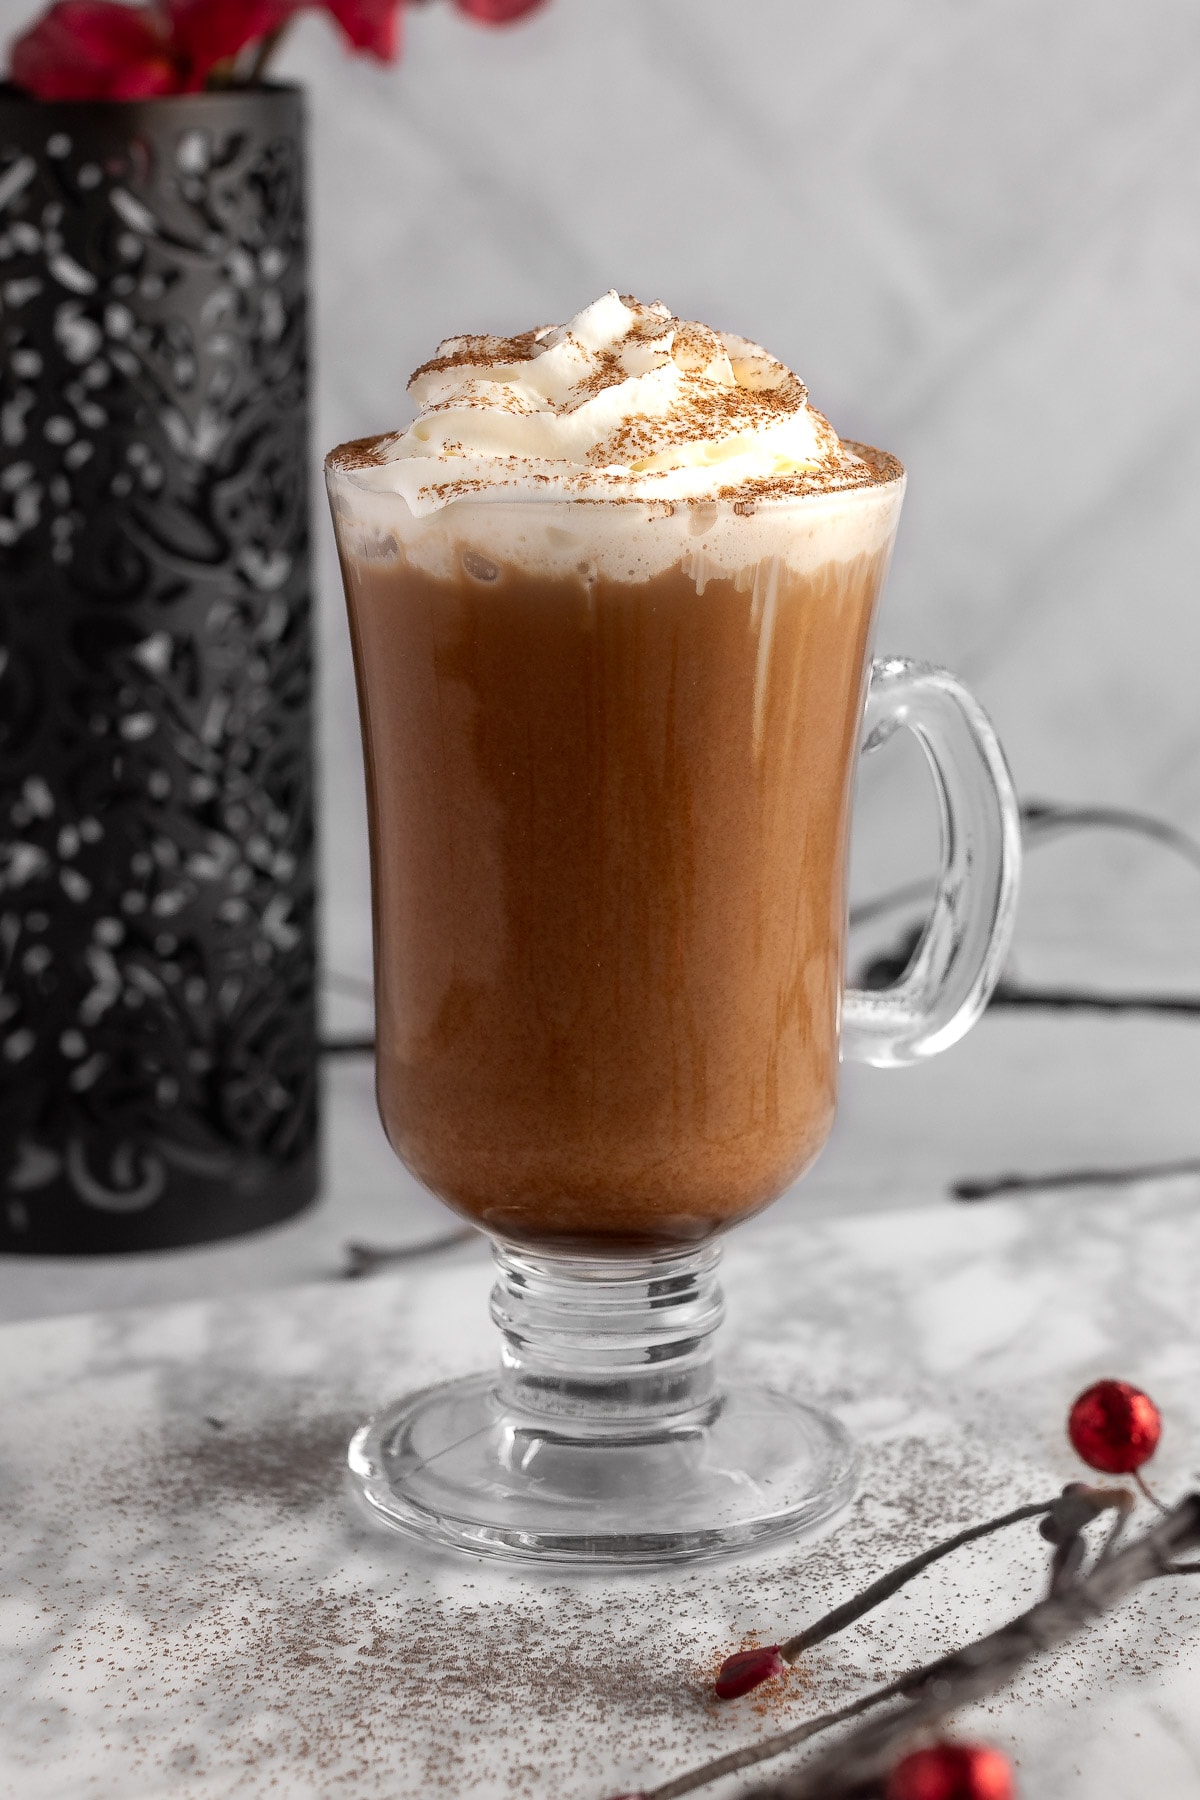 Iced mocha latte topped with whipped cream and sprinkled cocoa powder, with red flowers in the background.